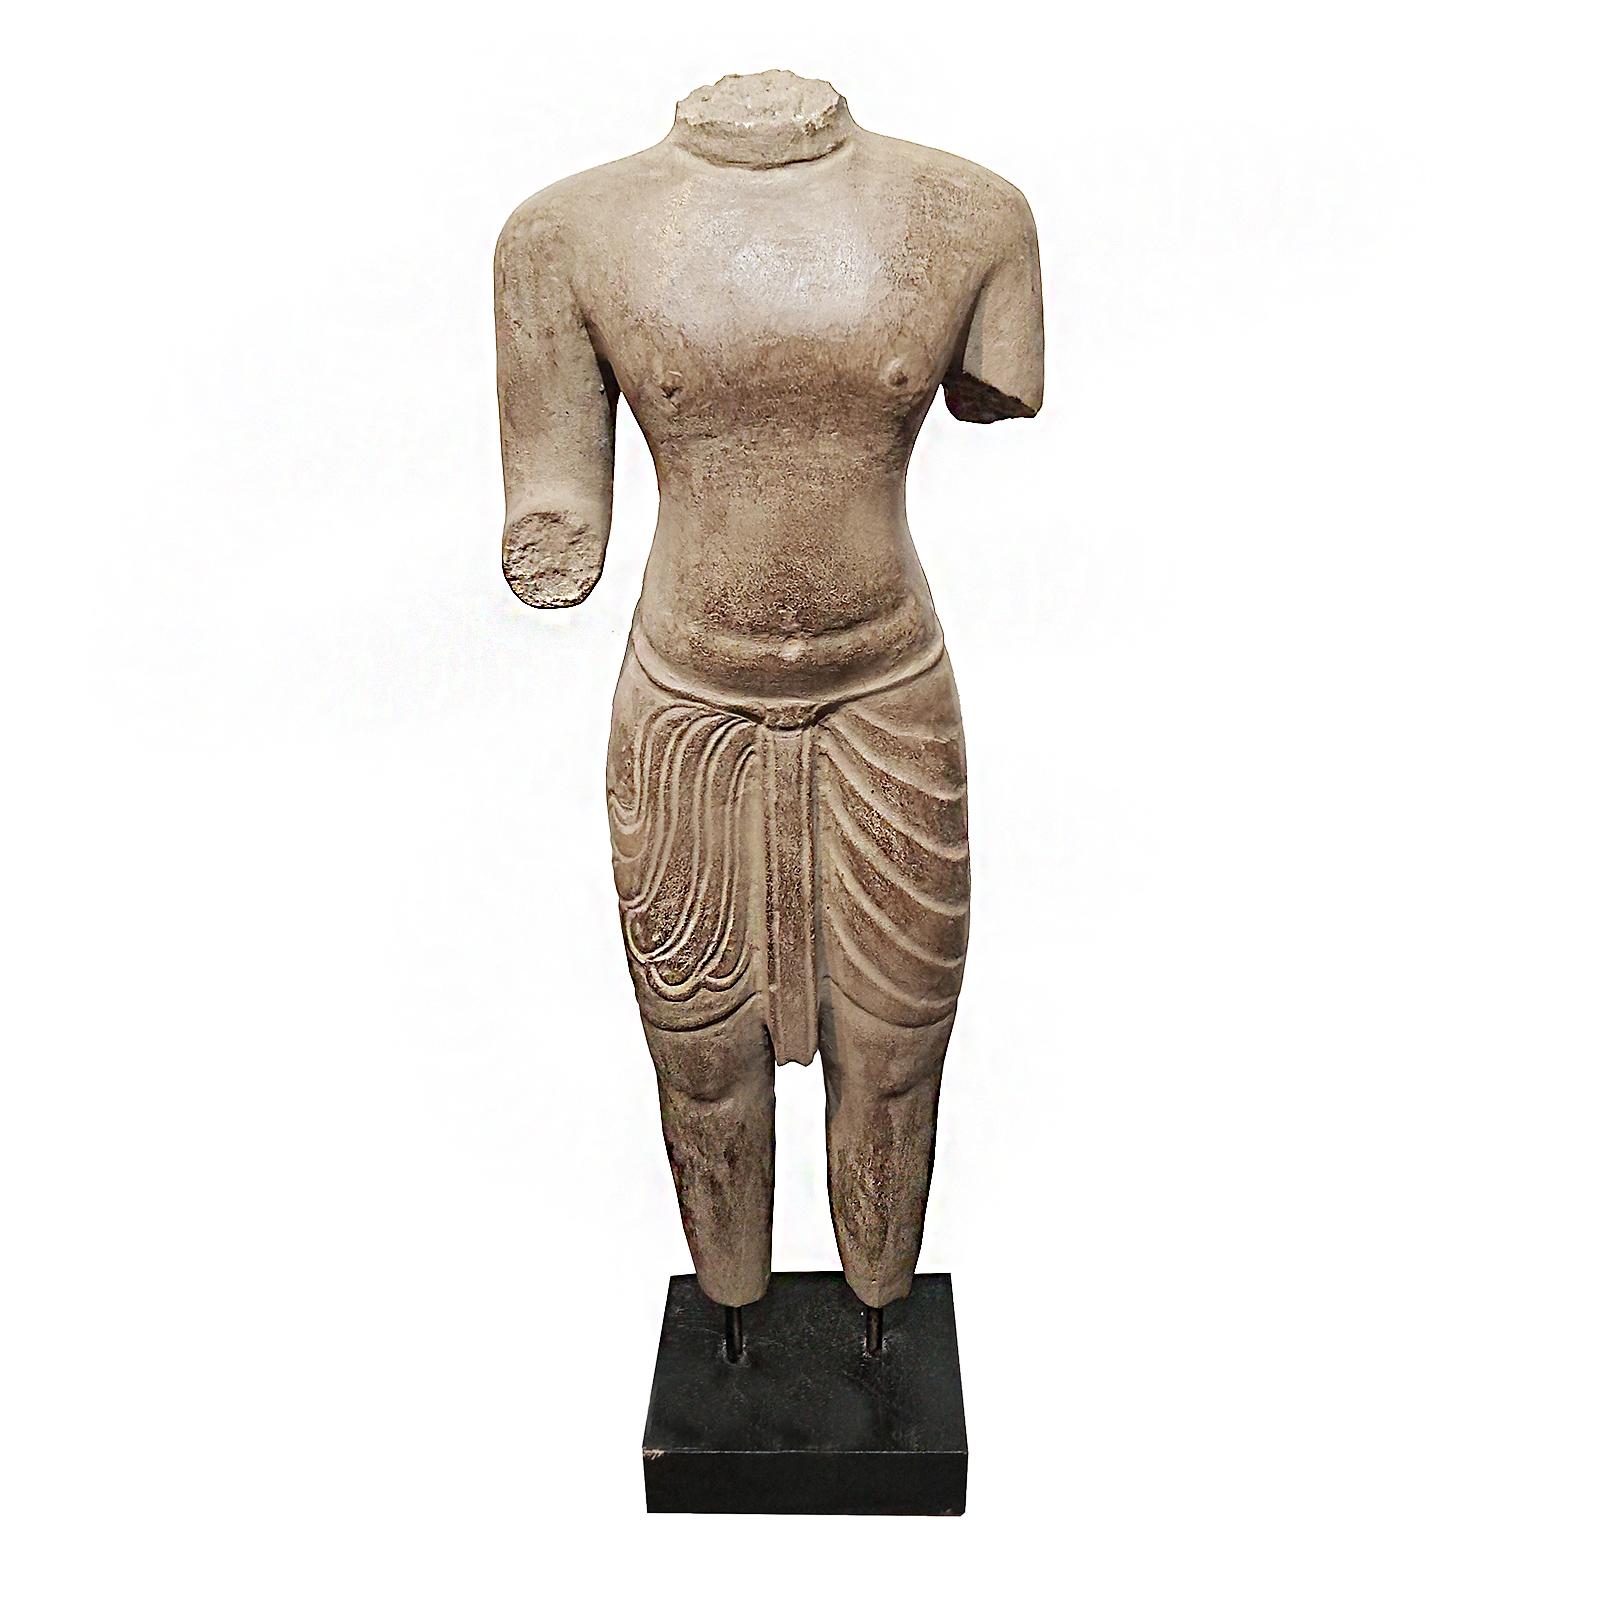 A table-top sculpture of a torso in traditional attire, hand-carved from a single piece of stone. From Thailand. Contemporary.

Mounted on a wood / metal stand. 28.5 inches high, 10 inches wide, on a 5